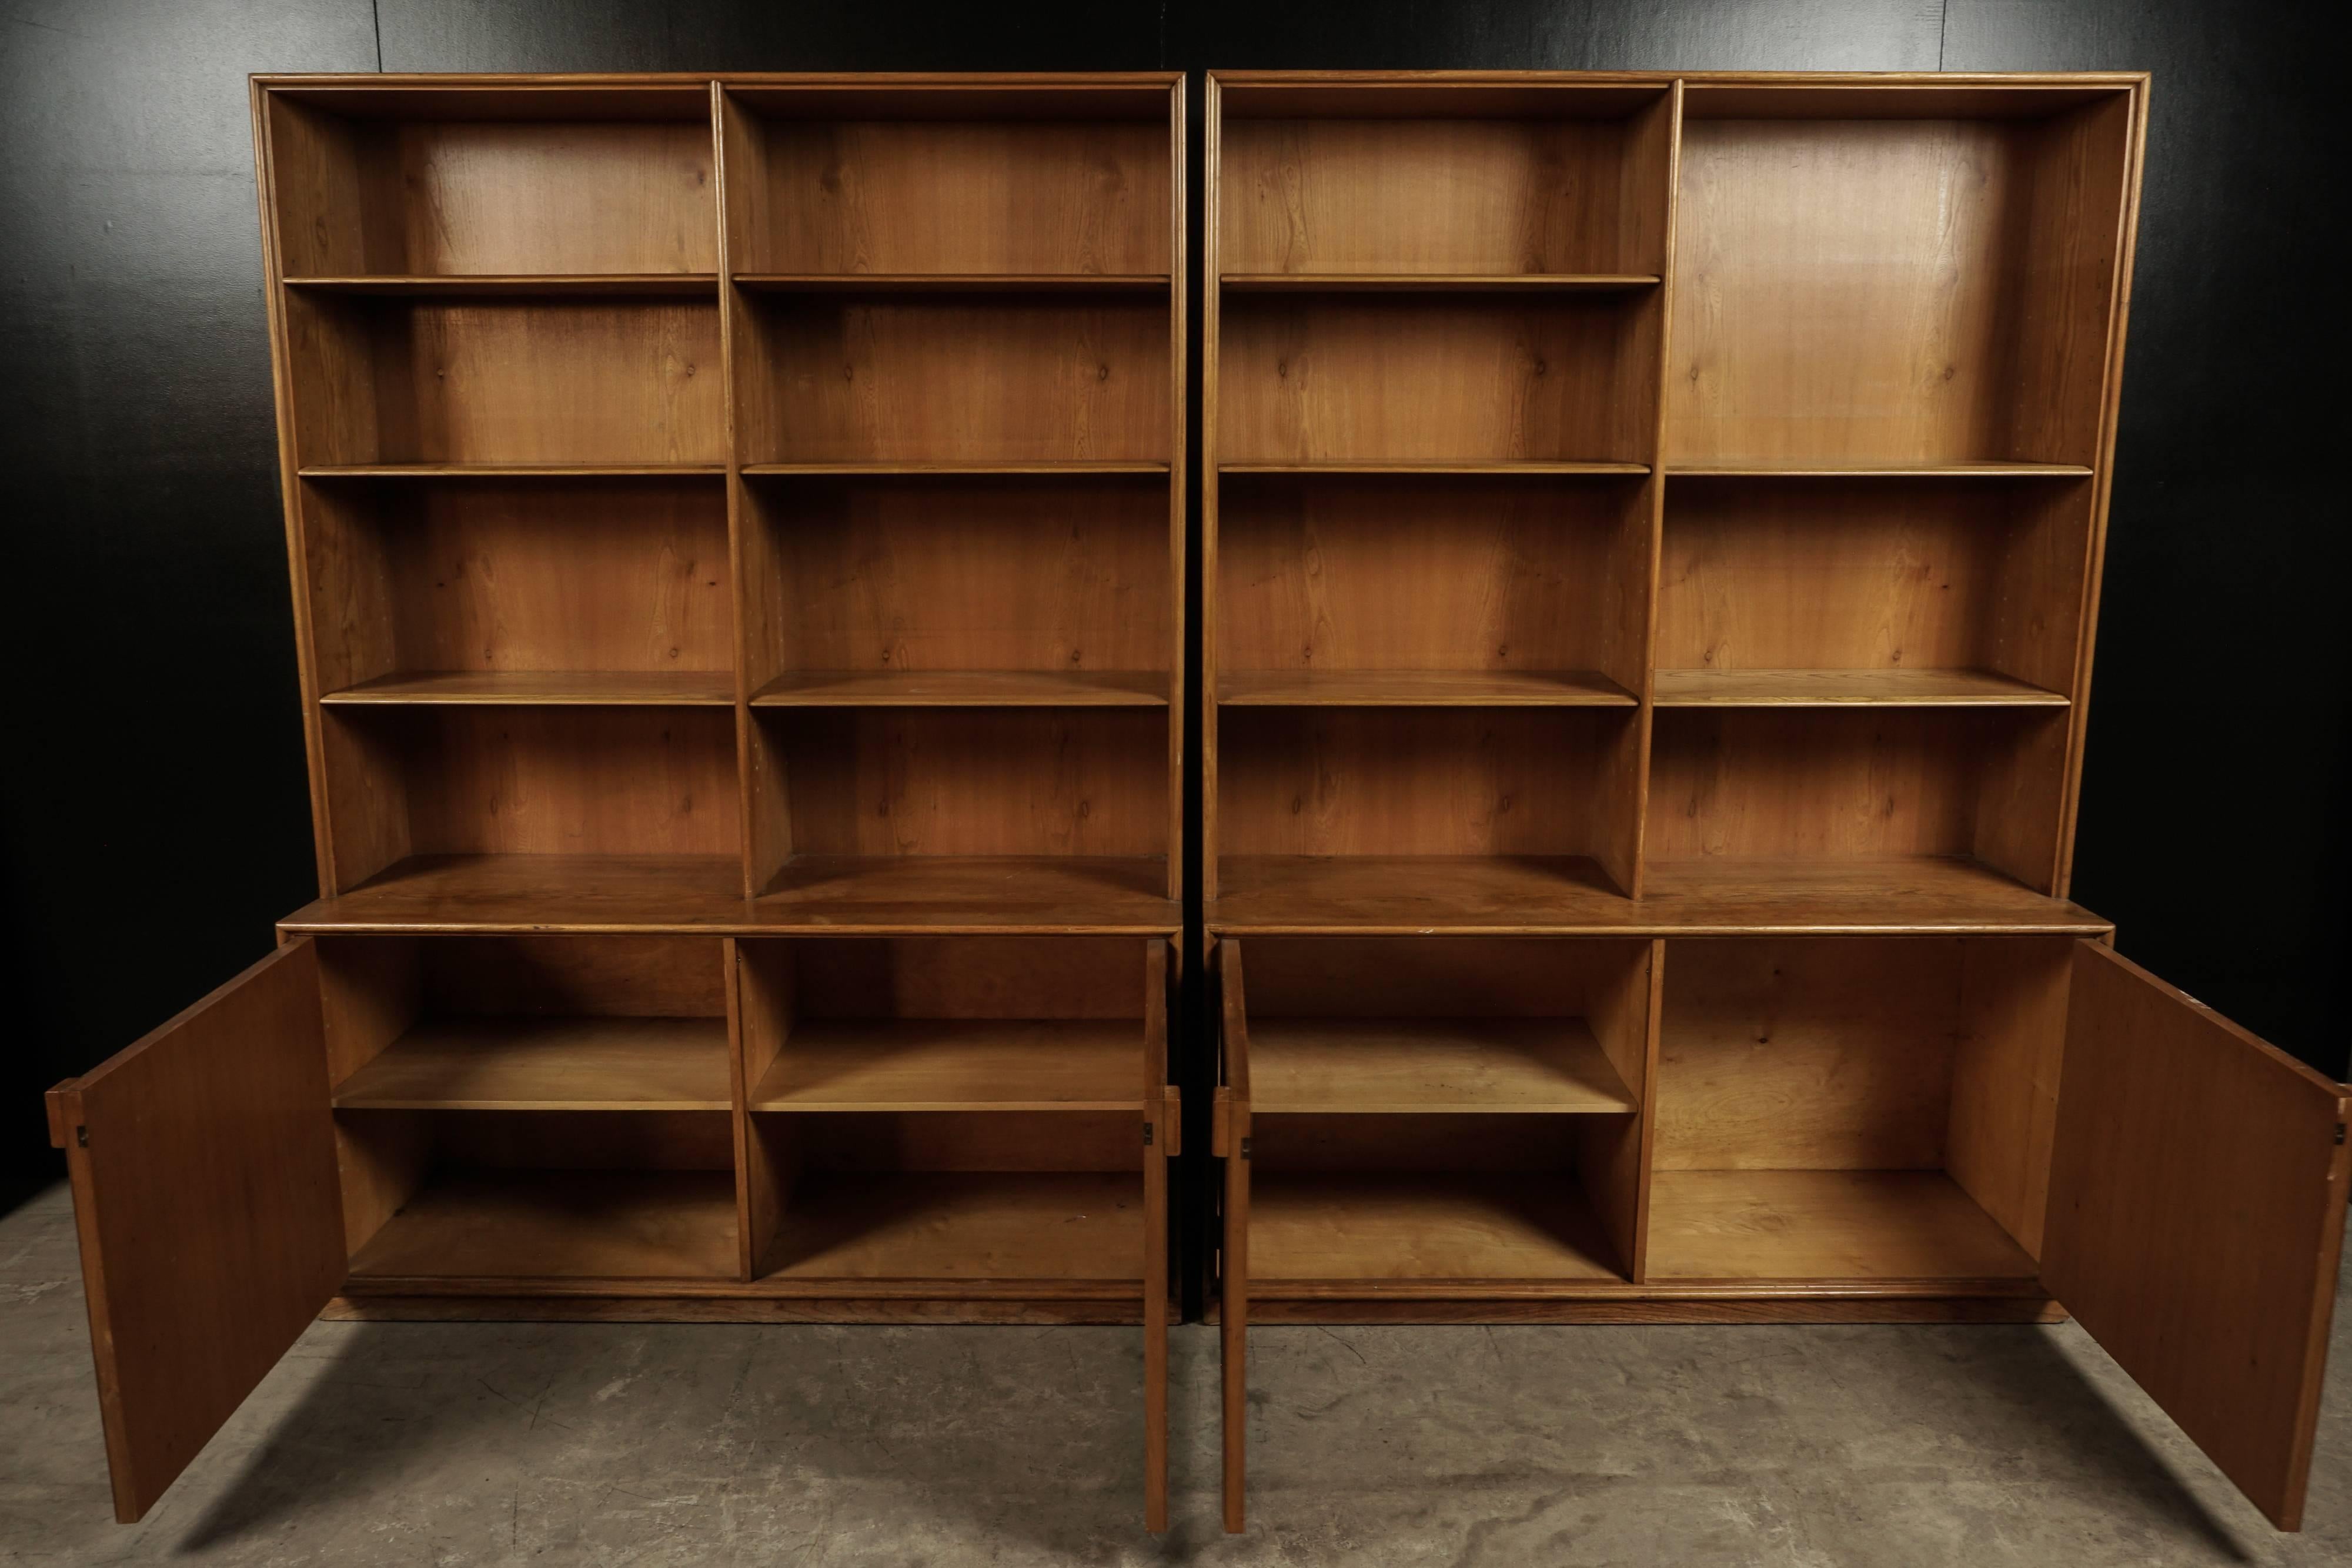 Pair of midcentury bookcases from Denmark, circa 1960. Designed by Frode Holm, and manufactured for Illums Bolighus, Denmark. Two units made of elm wood, with adjustable shelves.